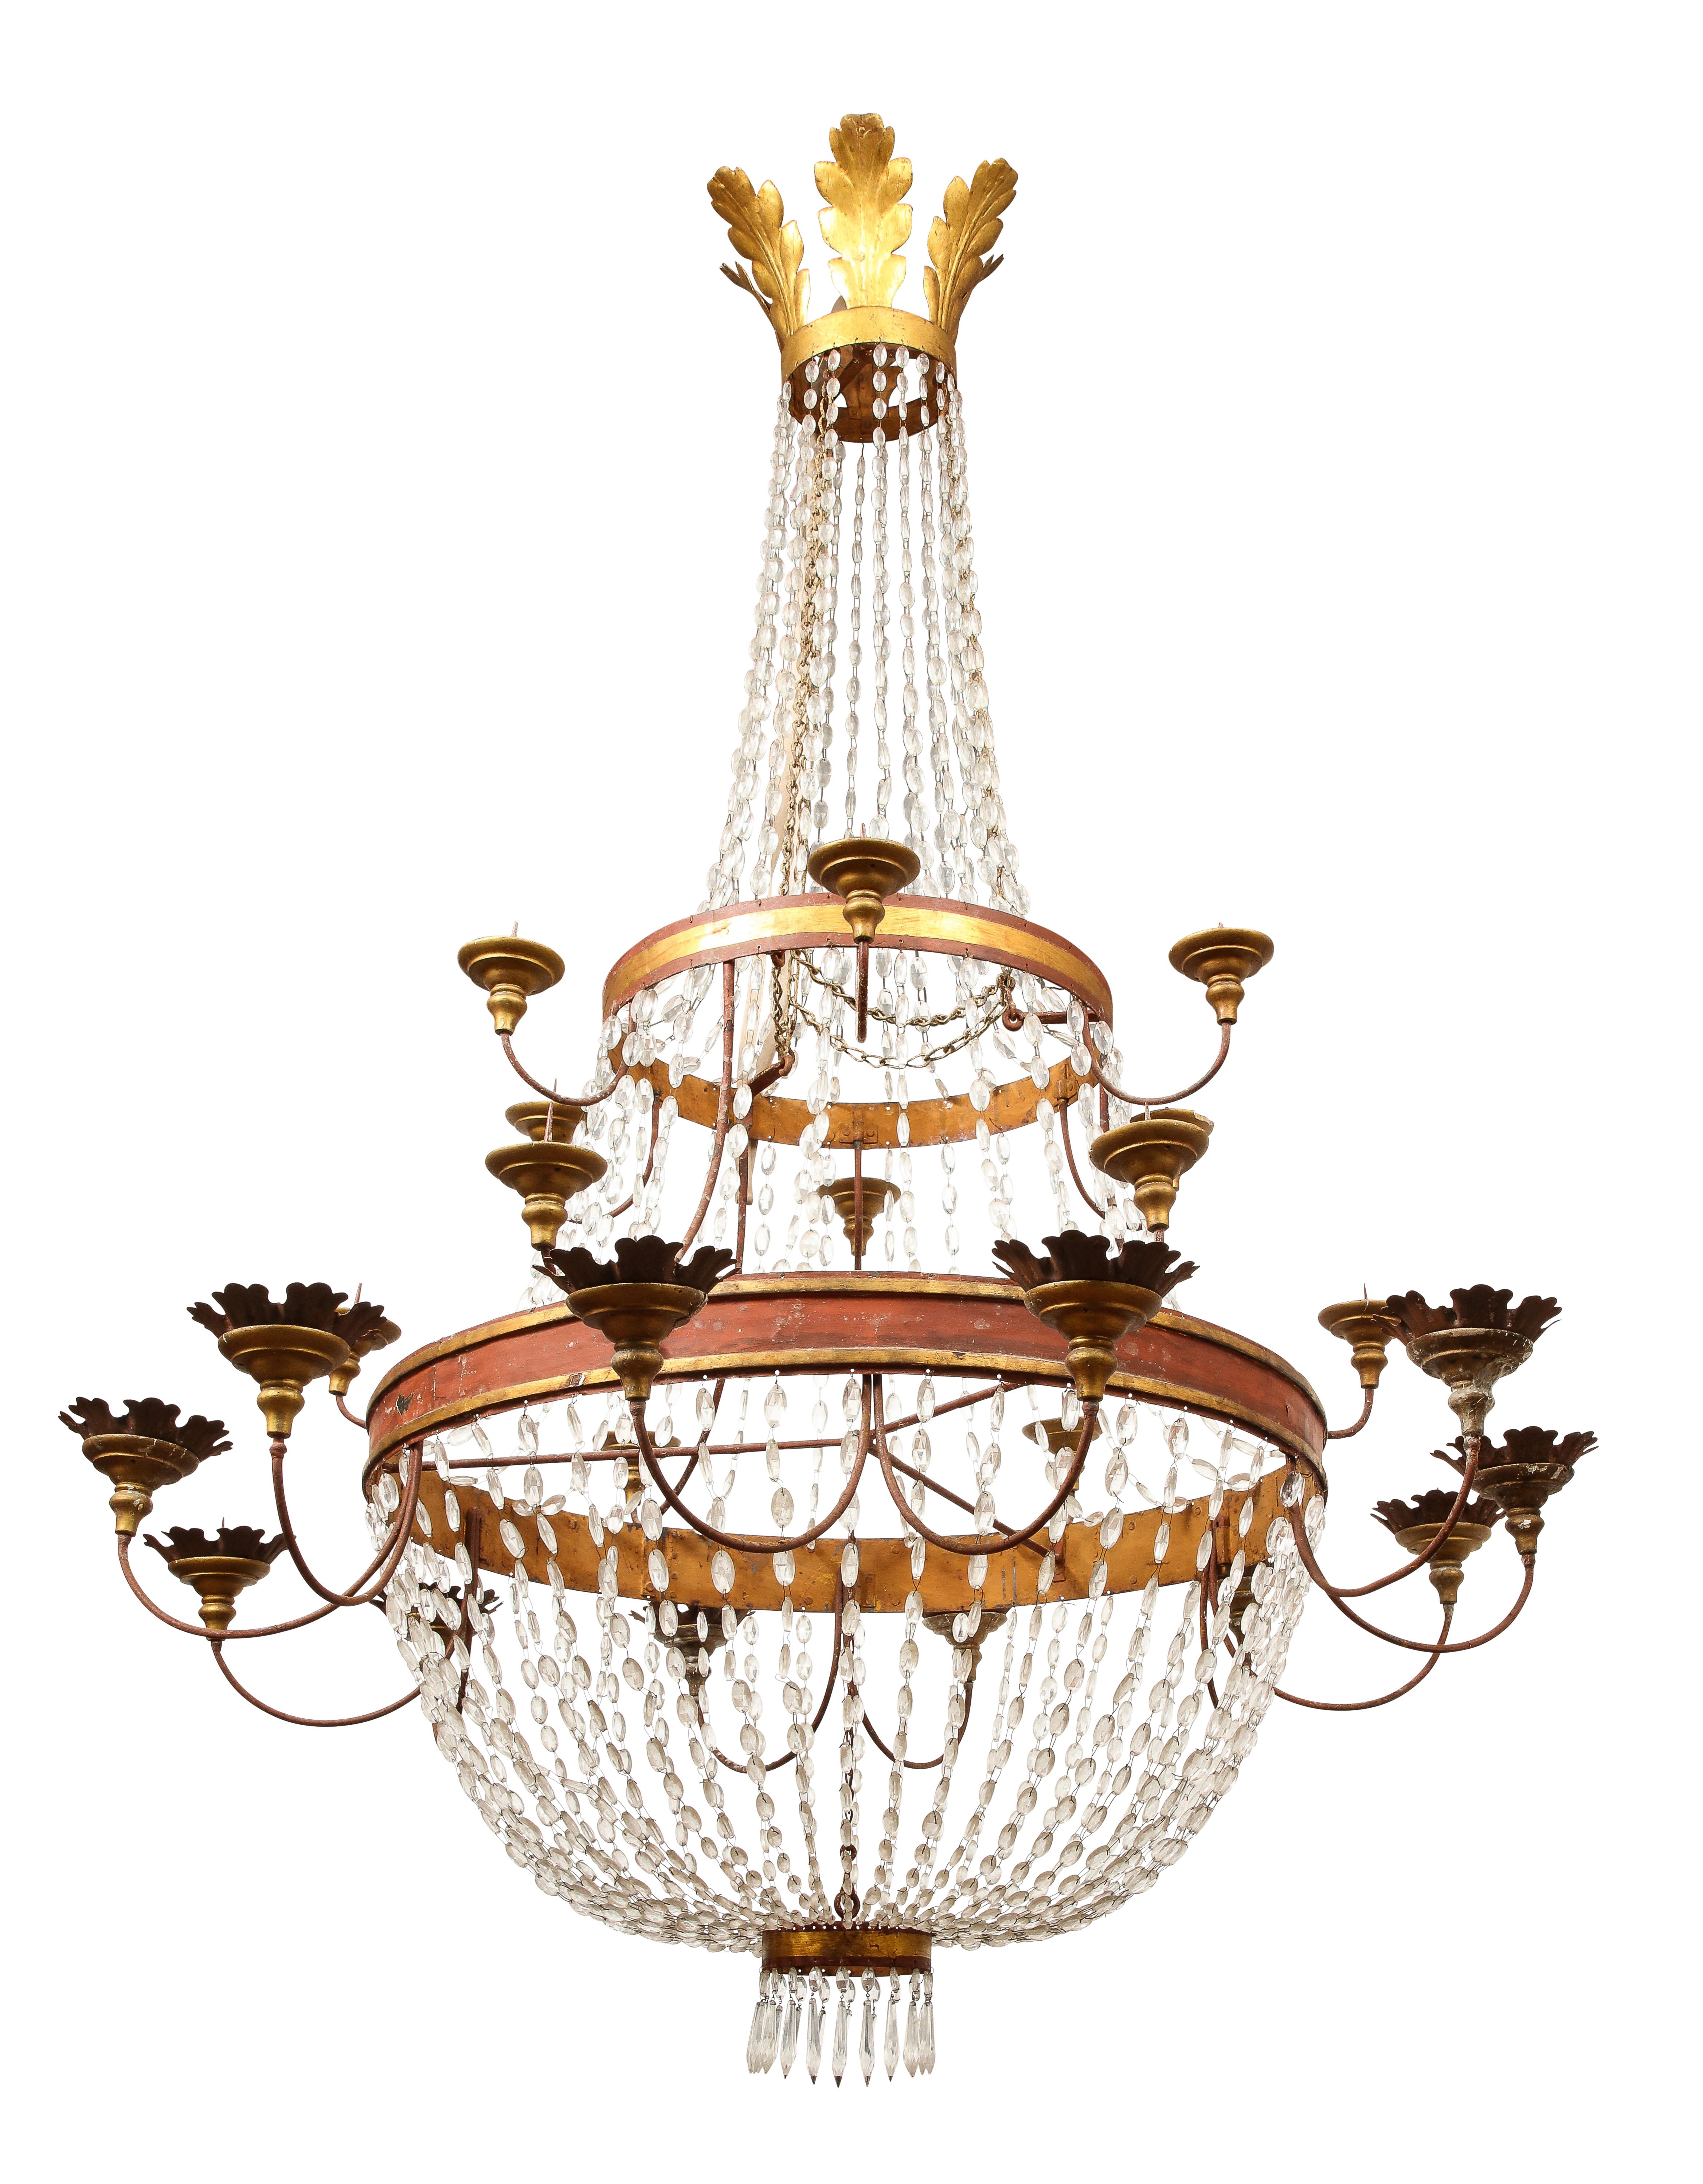 Impressive Neoclassical style 17th Century Italian crystal and gilt basket style chandelier. ***not electrified*** 

There are 25 candle stands, the bottom tier of which have ornamental leaves. Strands of crystal drape between the canopy and two